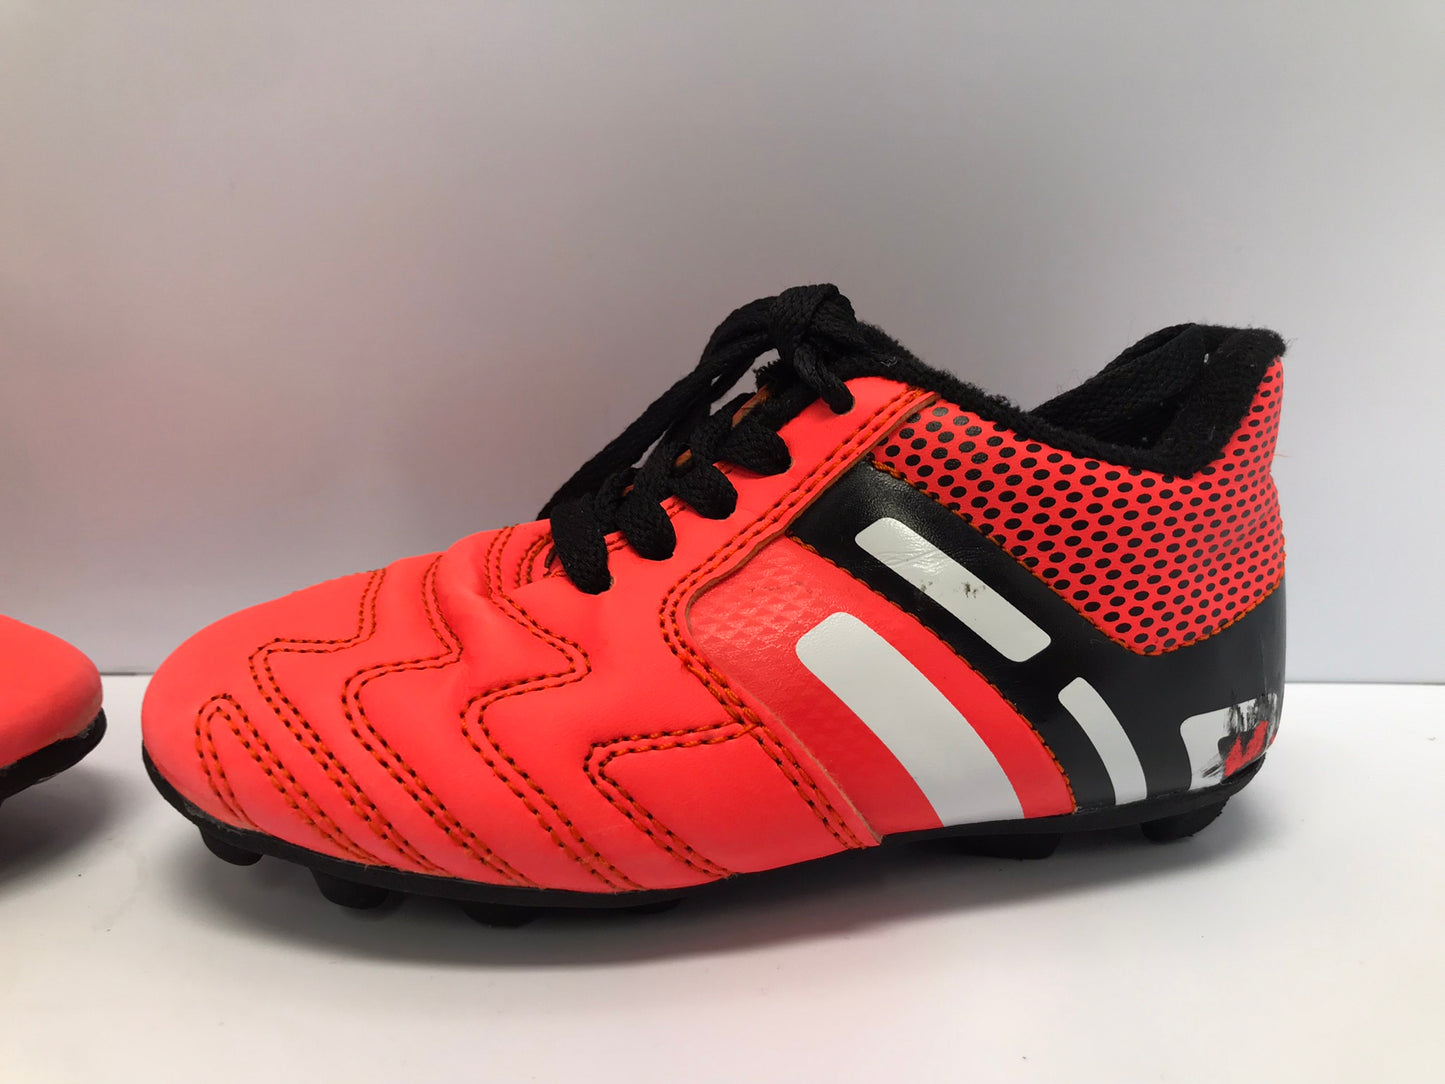 Soccer Shoes Cleats Child Size 10 Toddler Orange and Black Excellent